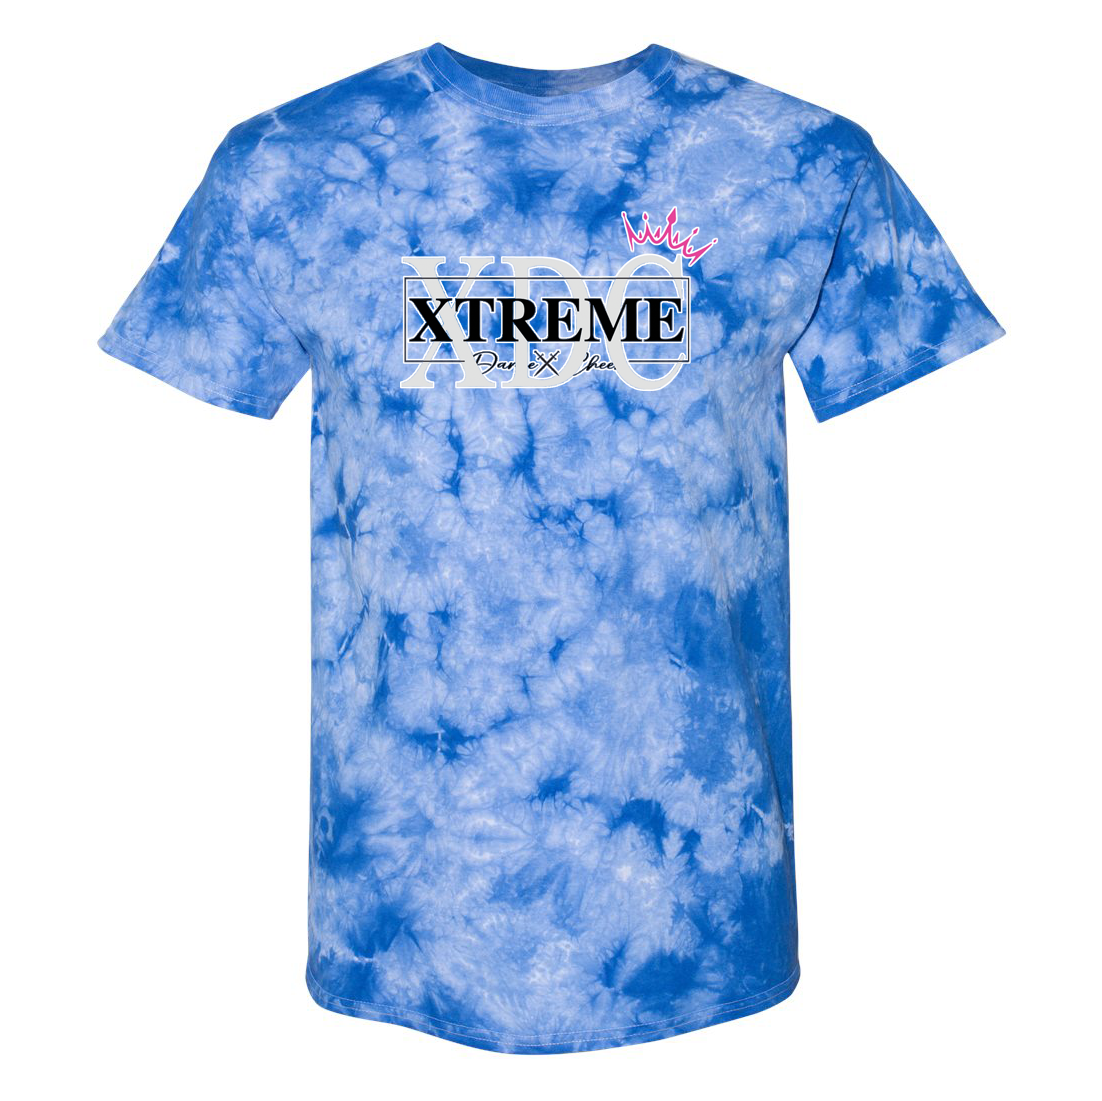 Xtreme Dance & Cheer Crystal Tie-Dyed T-Shirt